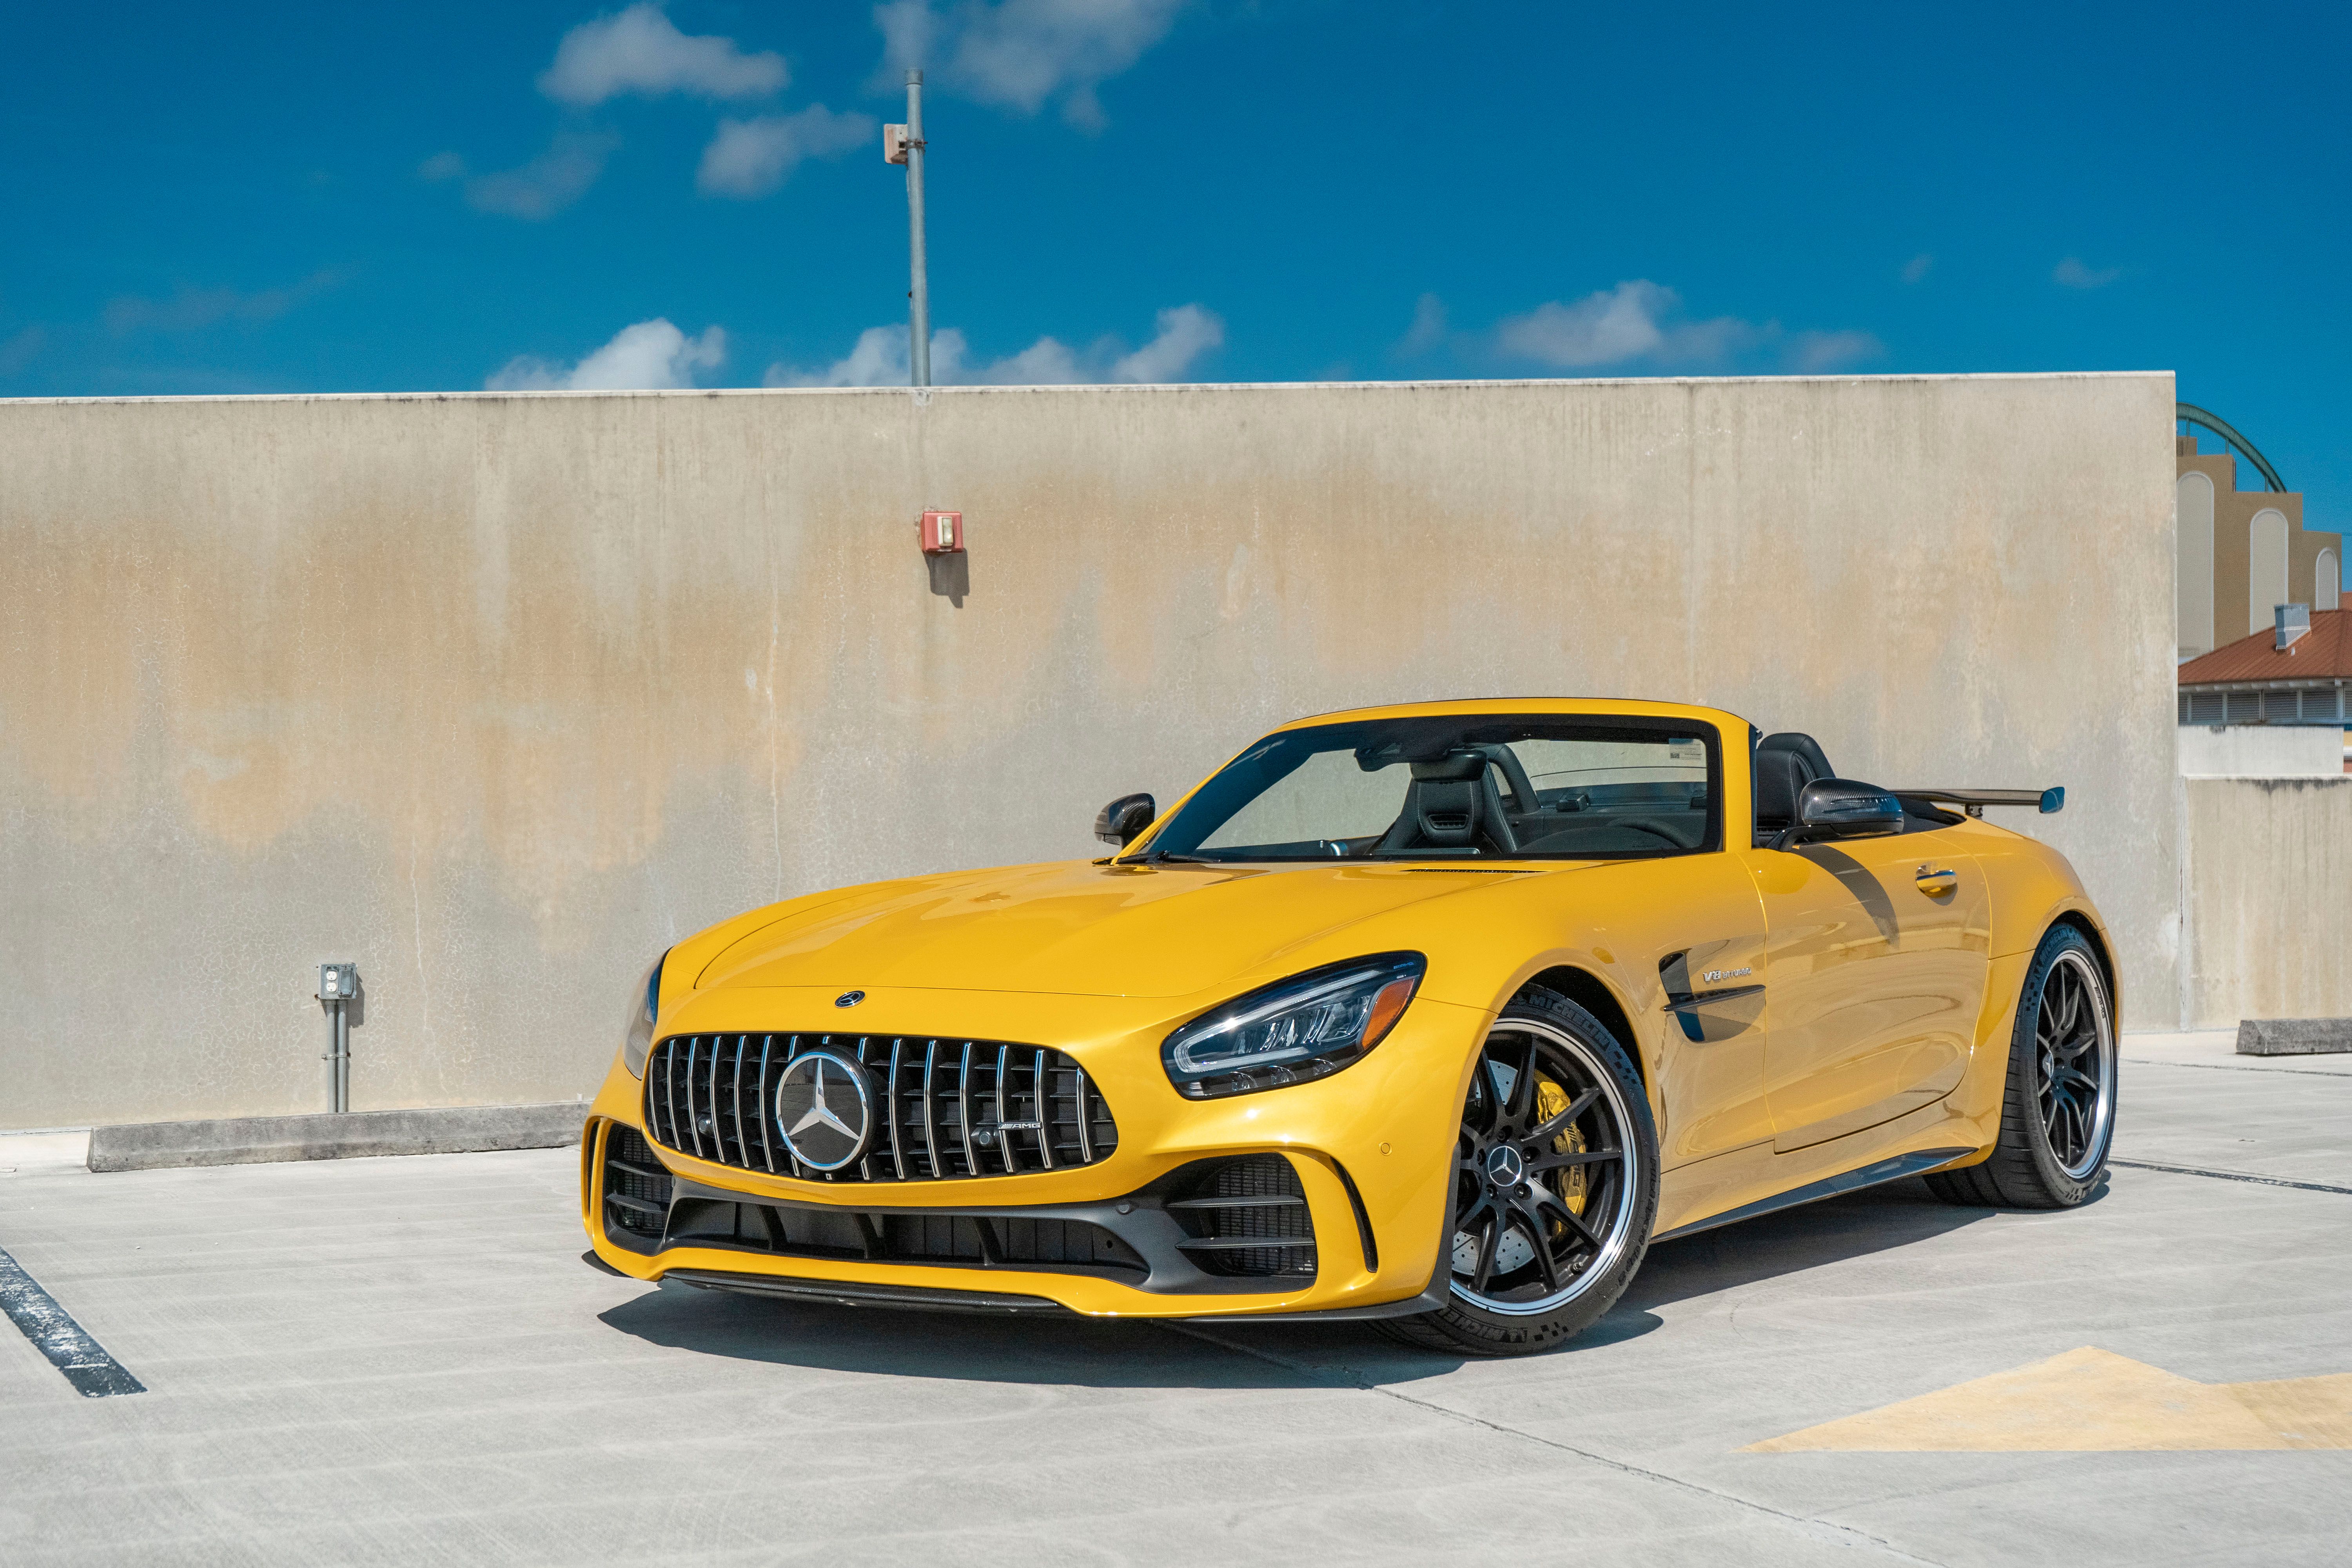 2020 Mercedes-AMG GT R Roadster - Driven Review and Impressions